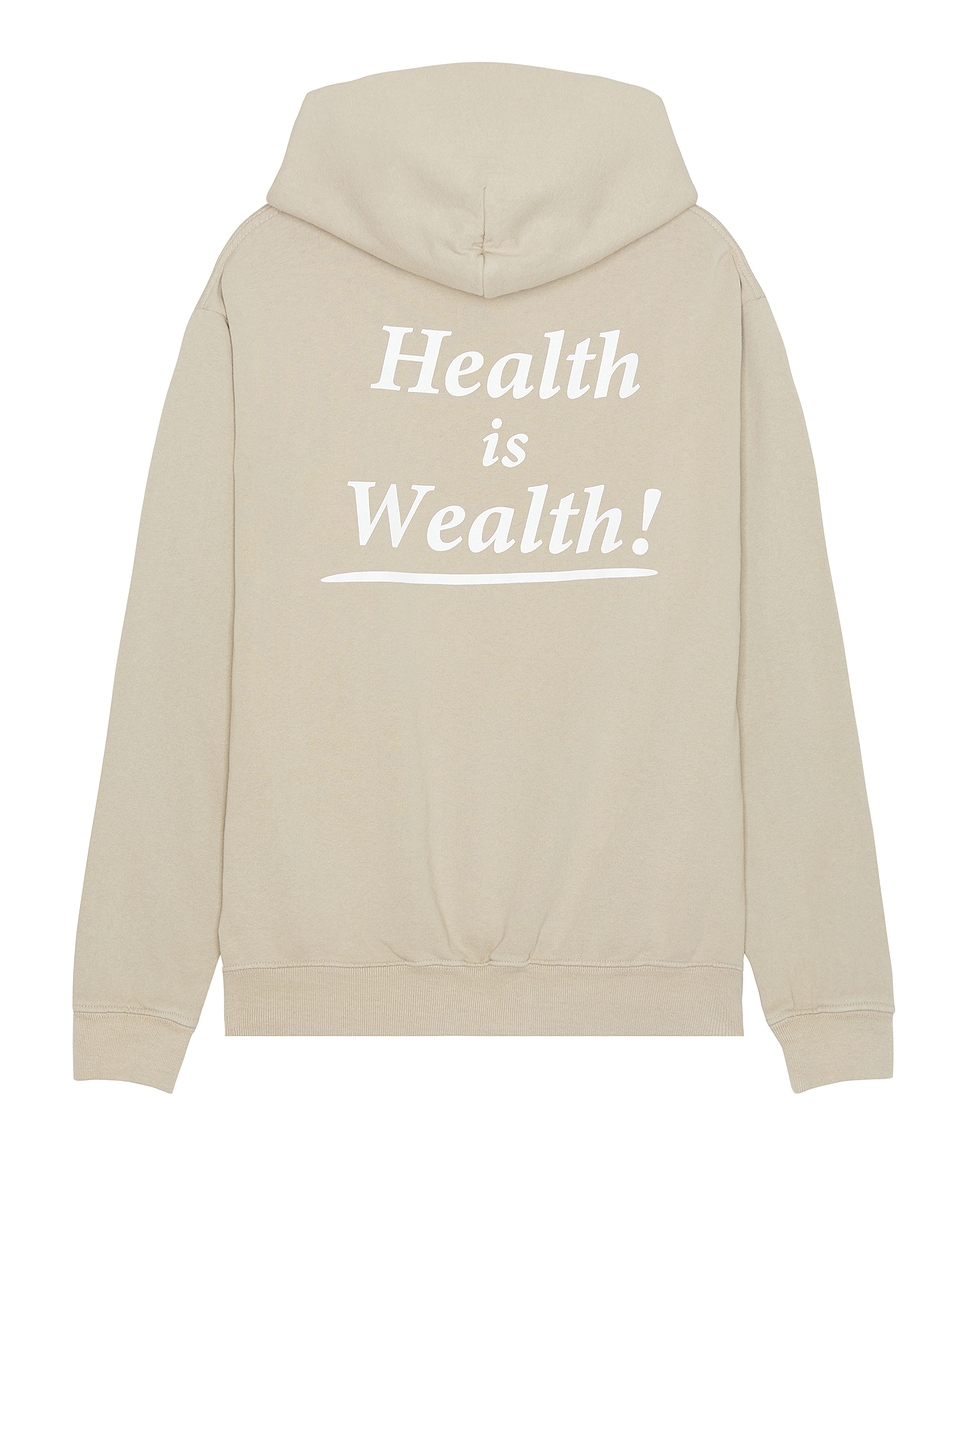 Image 1 of Sporty & Rich Health Is Wealth Hoodie in Elephant